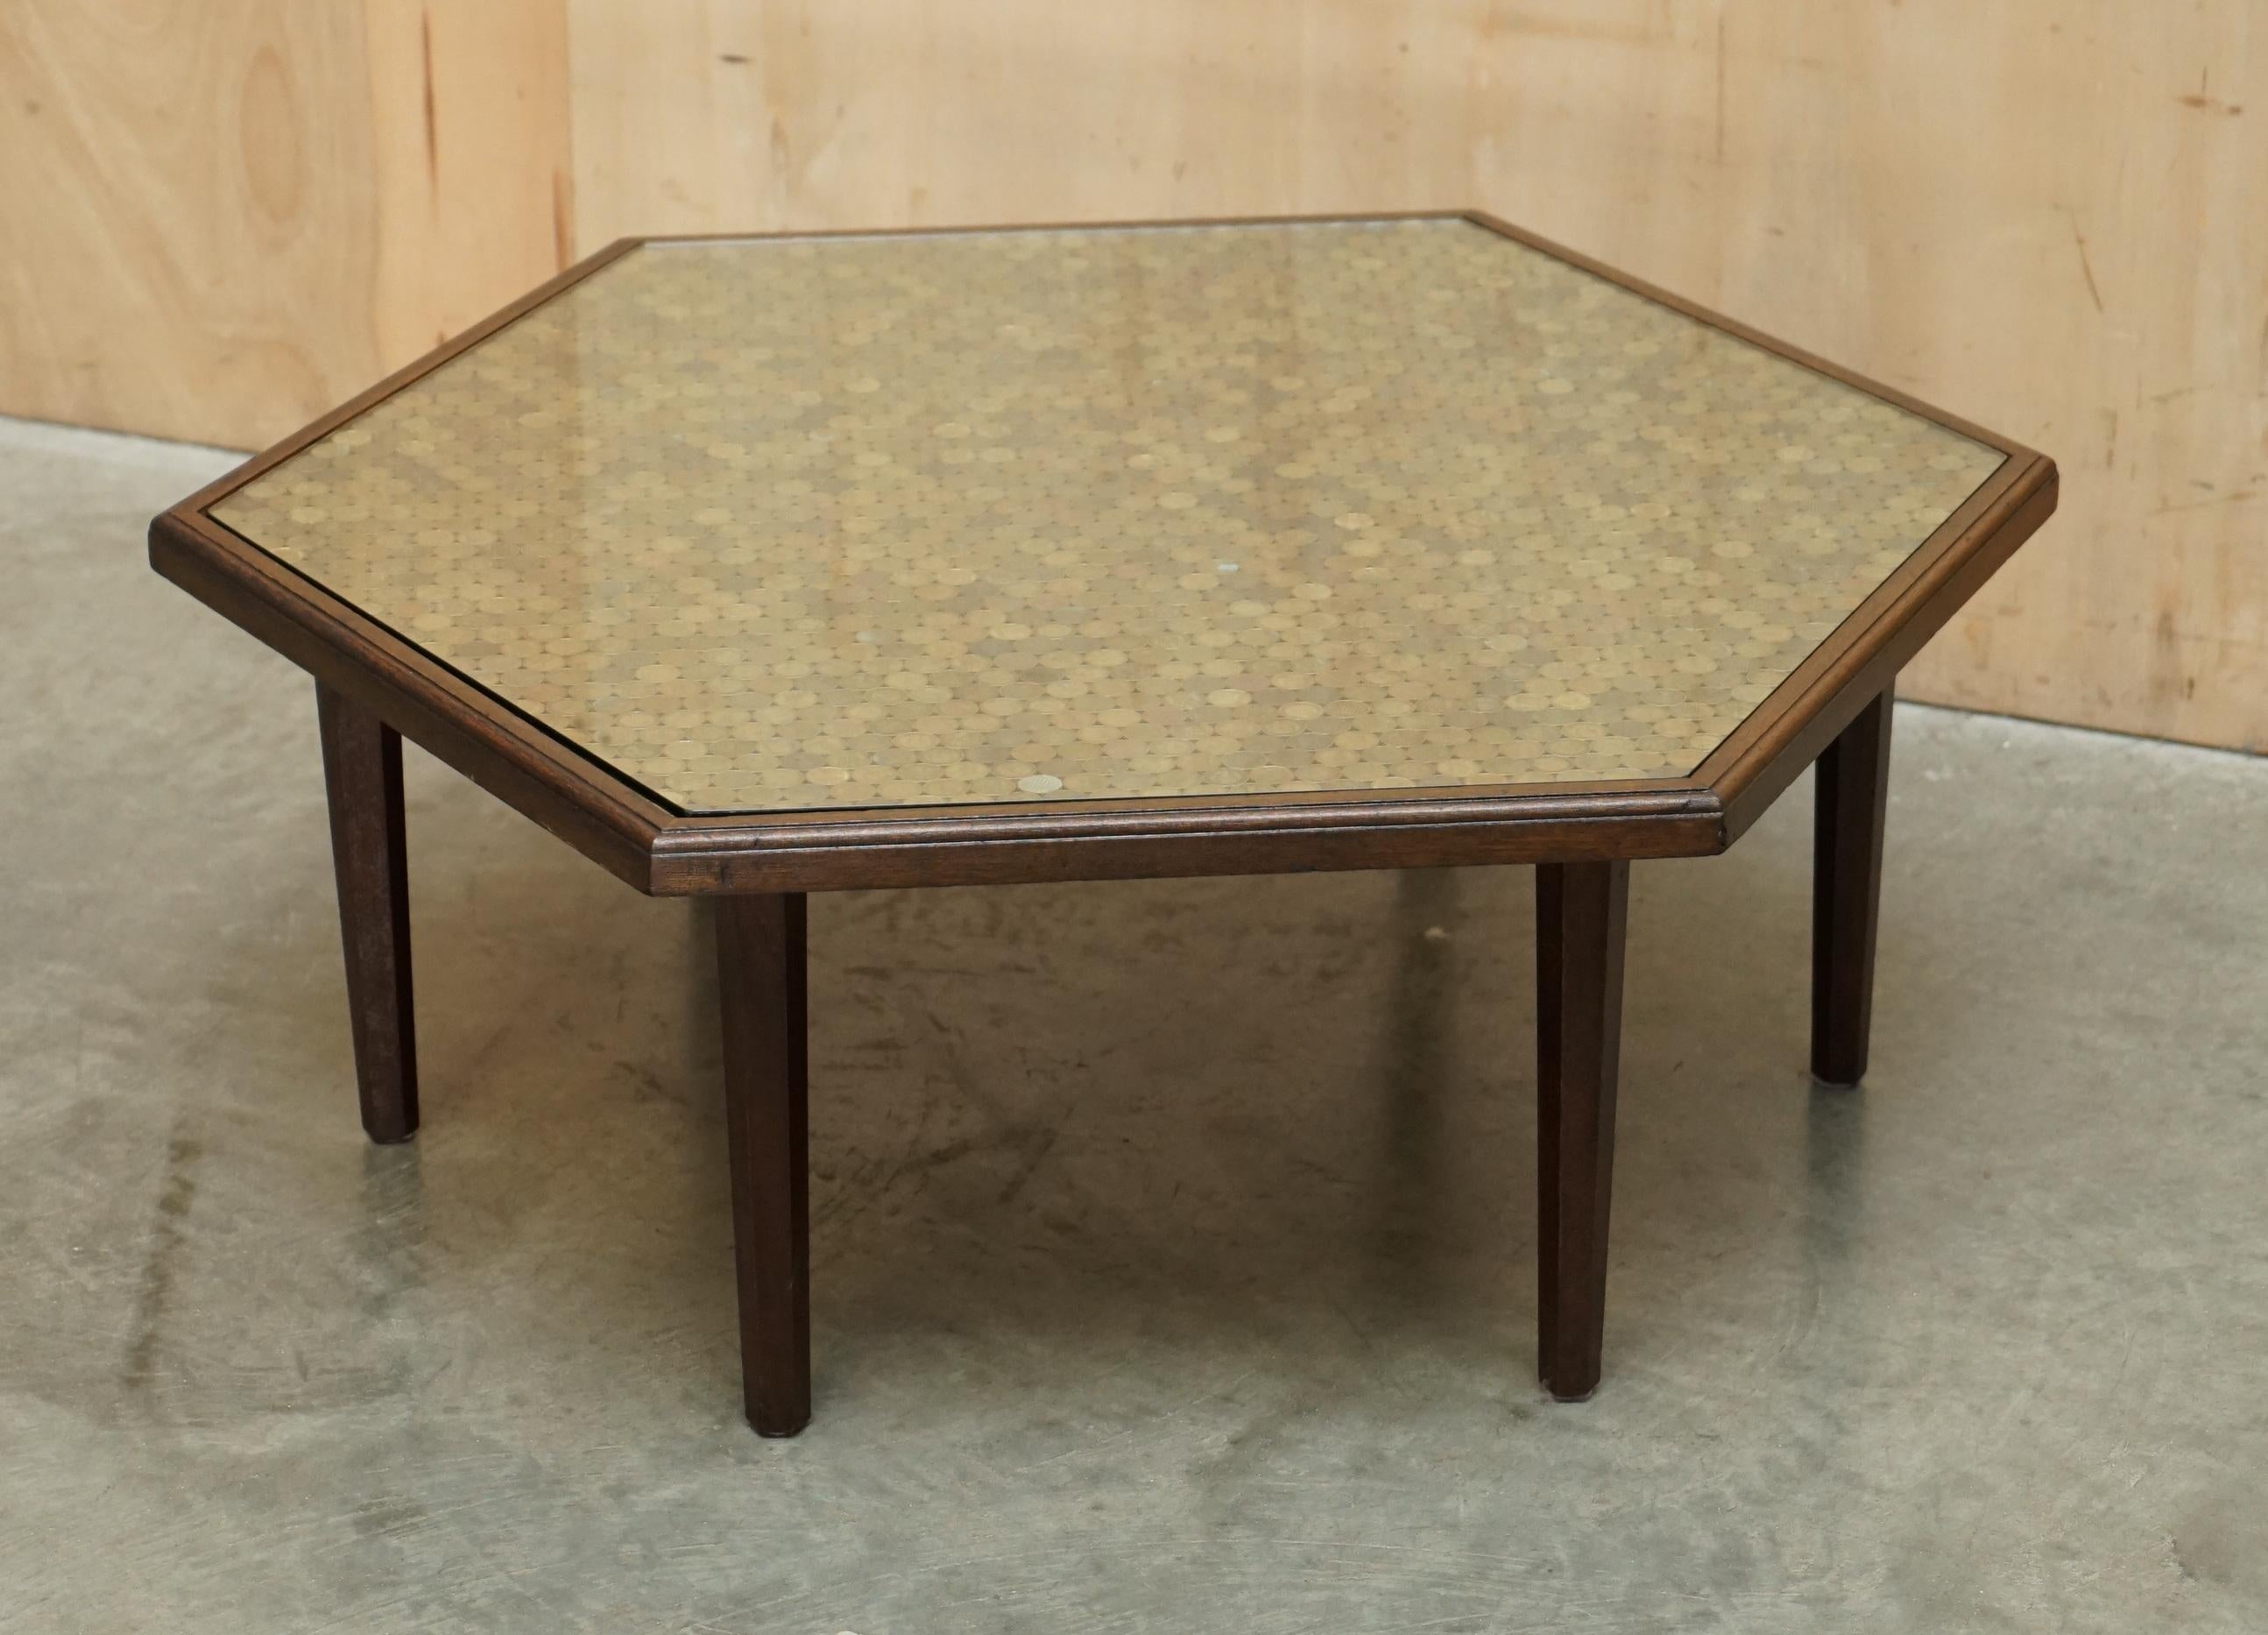 ANTIQUE CIRCA 1920 COFFEE TABLE COVERS IN ENGLISH THREE PENCE COINS FROM 1940er Jahre (Art déco) im Angebot